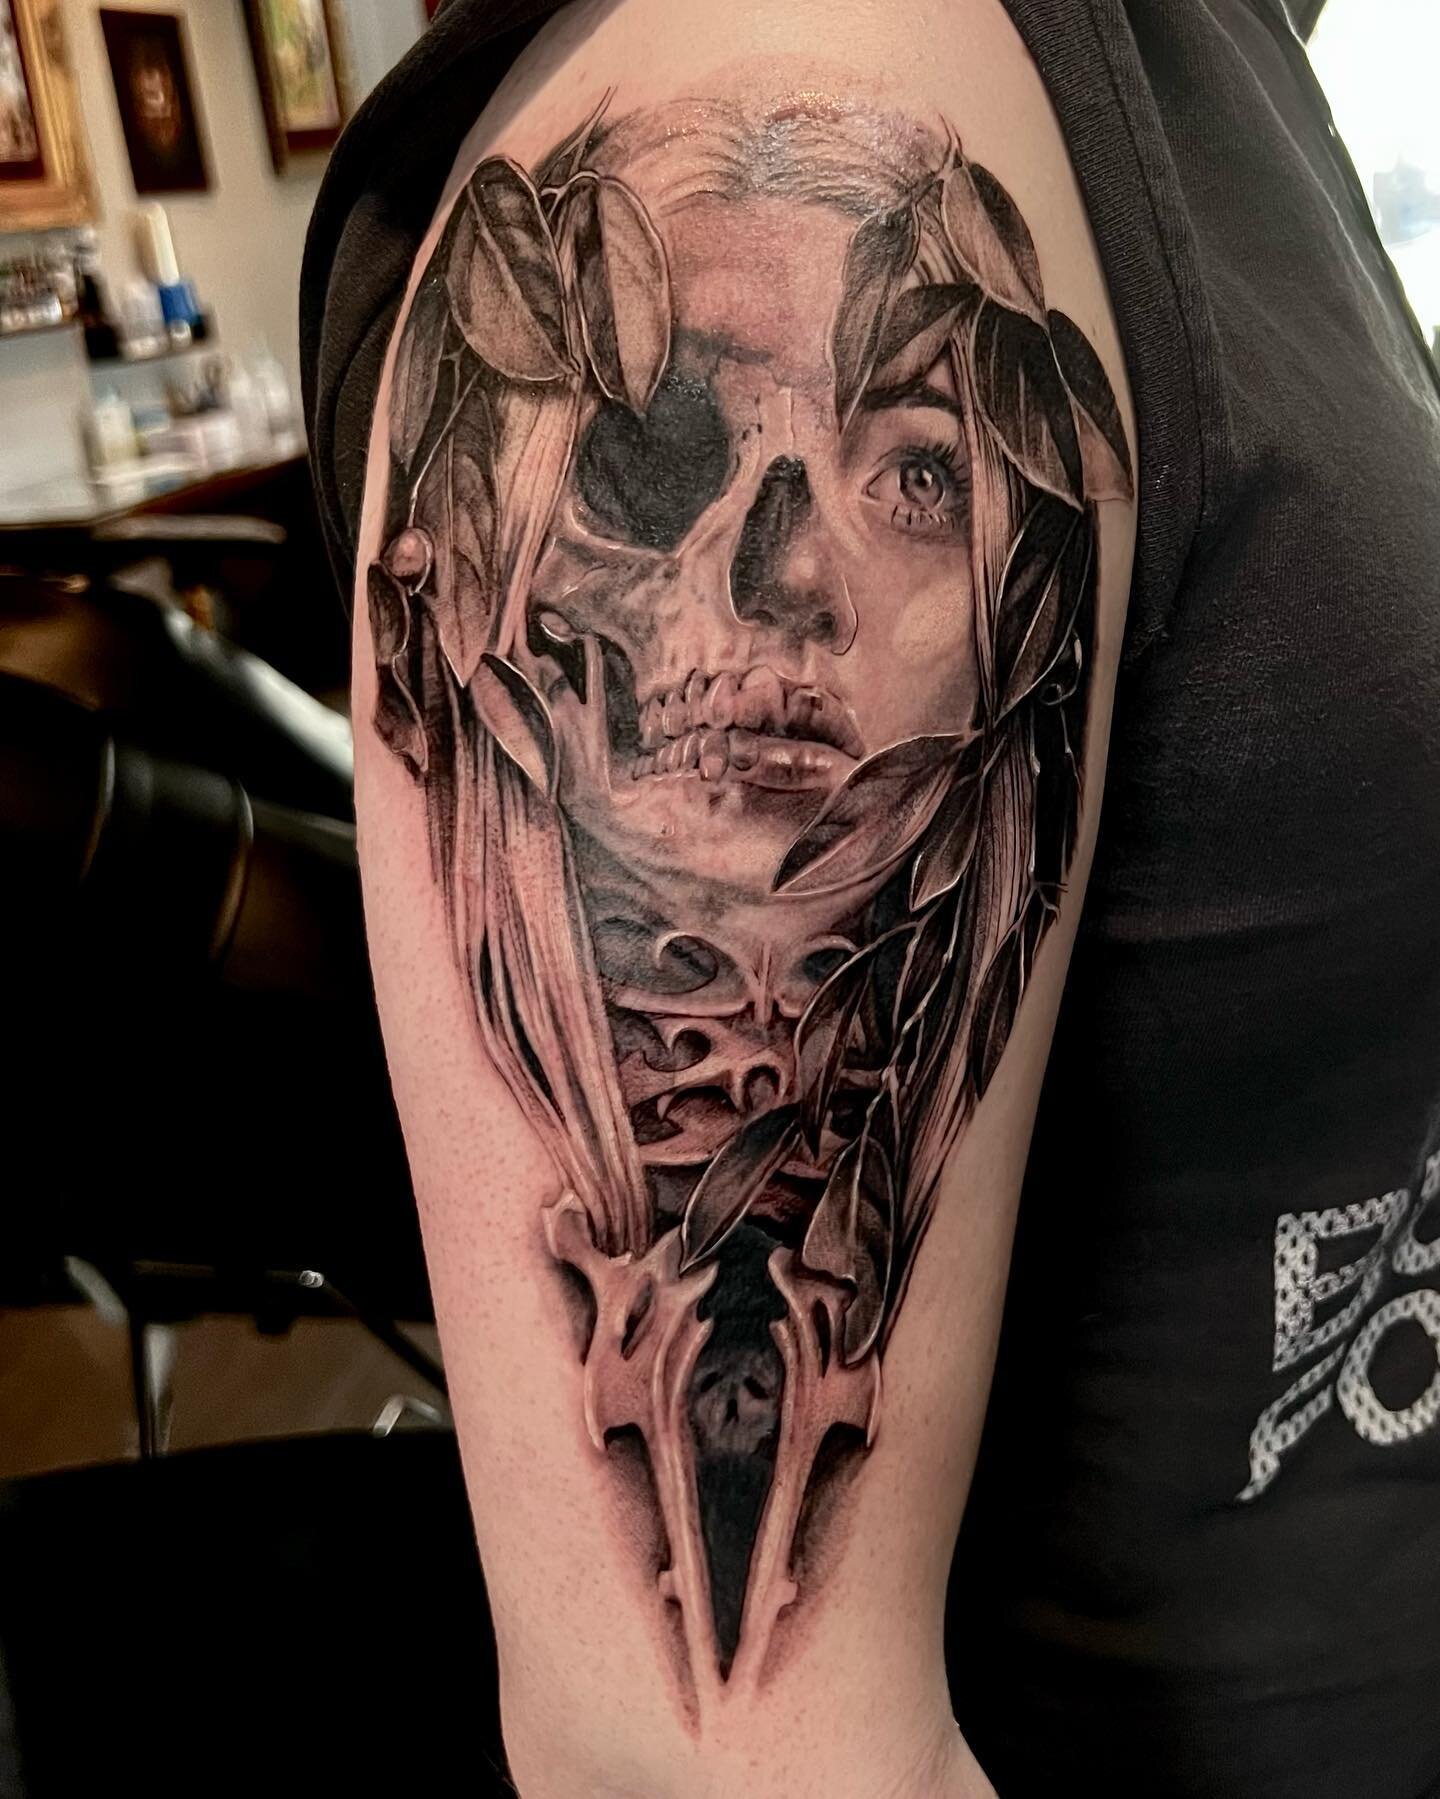 I loved doing this, thank you Seth! Sorry for the crap photo&hellip;. #tattoo #tattooartist #tattooshop #tattooideas #tattoos #tattoostyle #tattooart #tattoodesign #tattoos #blackandgrey #blackandgreytattoo #blackandgray #blackandgraytattoo #sandiego